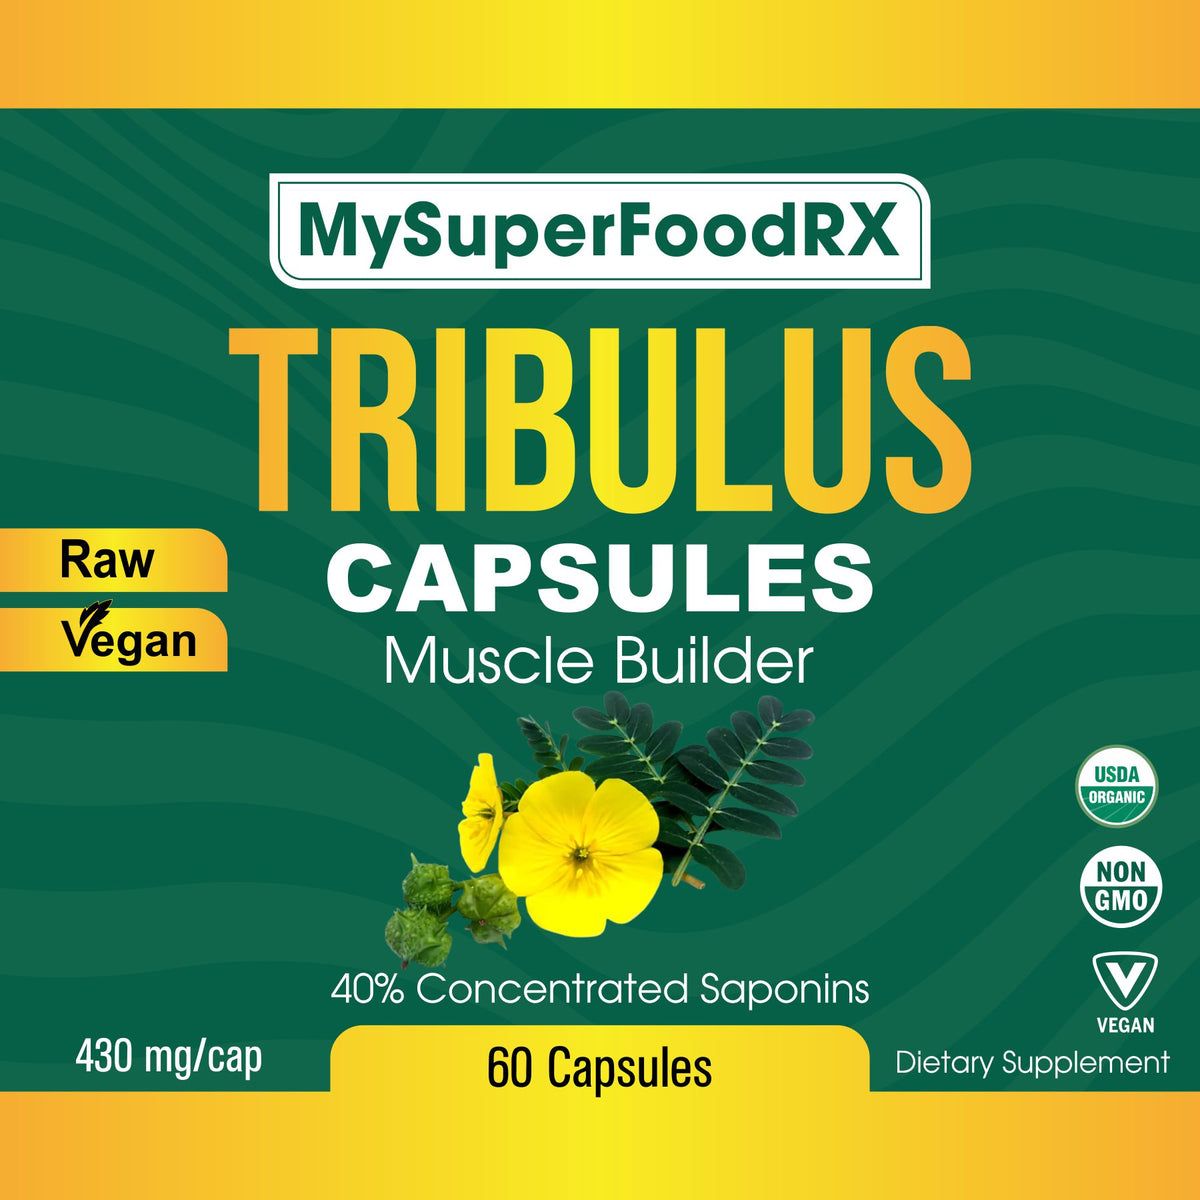 the label for my superfood rx tribulus capsules muscle builder